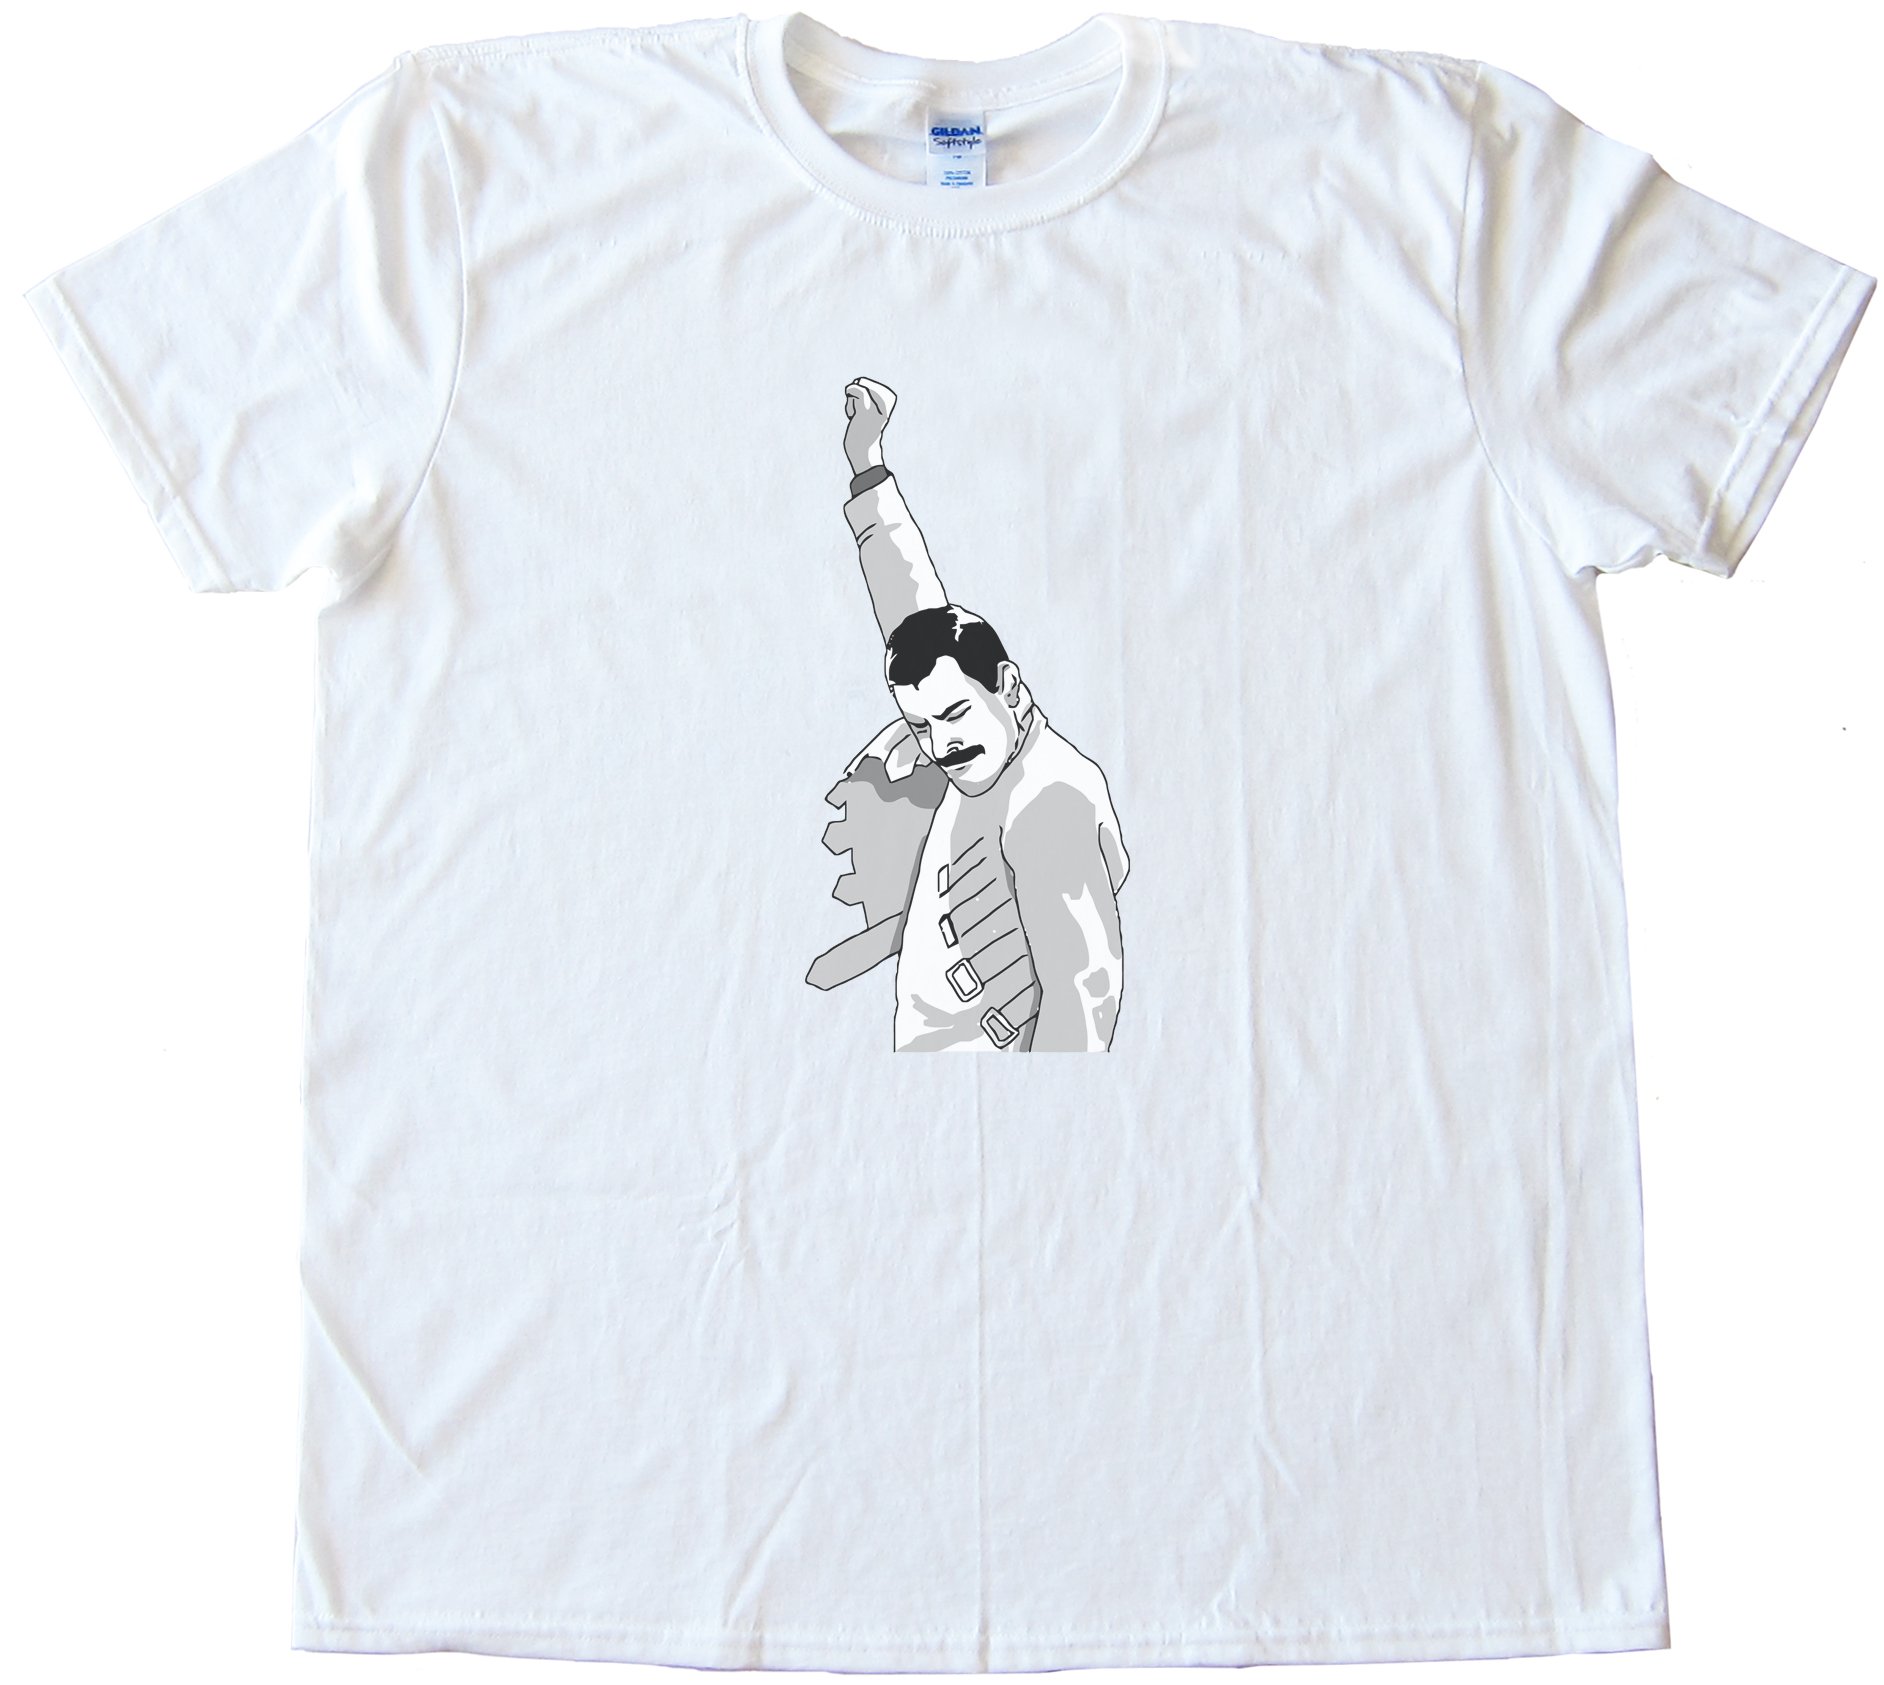 Freddy Mercury - Lead Singer Of The Rock & Roll Band Queen Tee Shirt